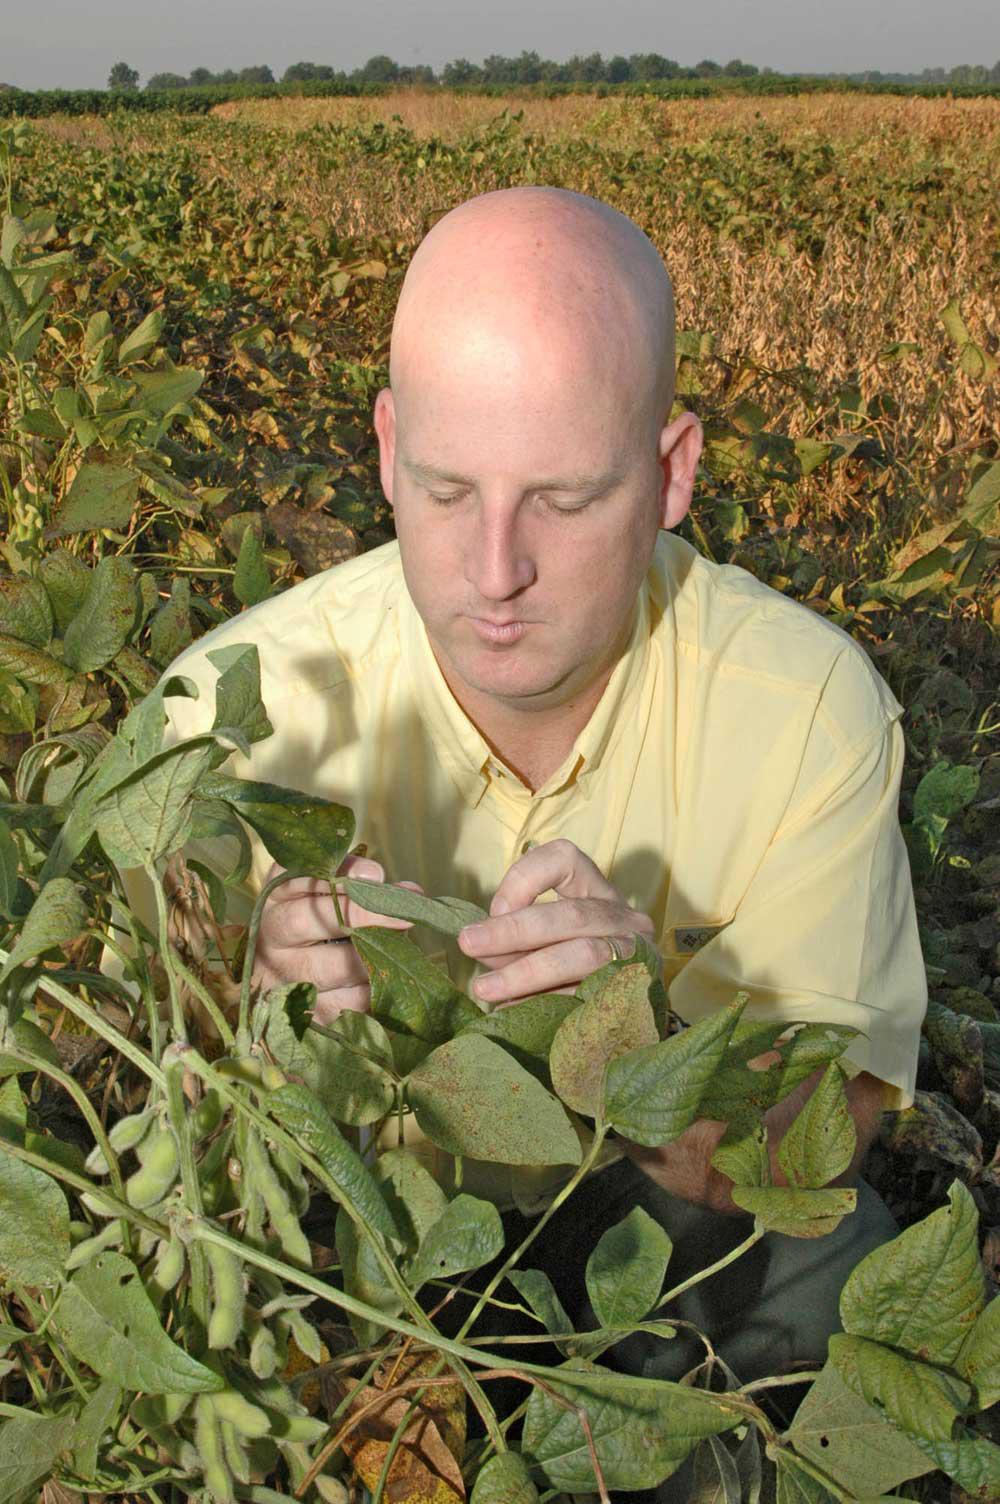 Mississippi State University Extension plant pathologist for the Delta, Tom Allen, inspects soybeans infested with Asian soybean rust in a sentinel plot in Stoneville. (Photo by Robert H. Wells)